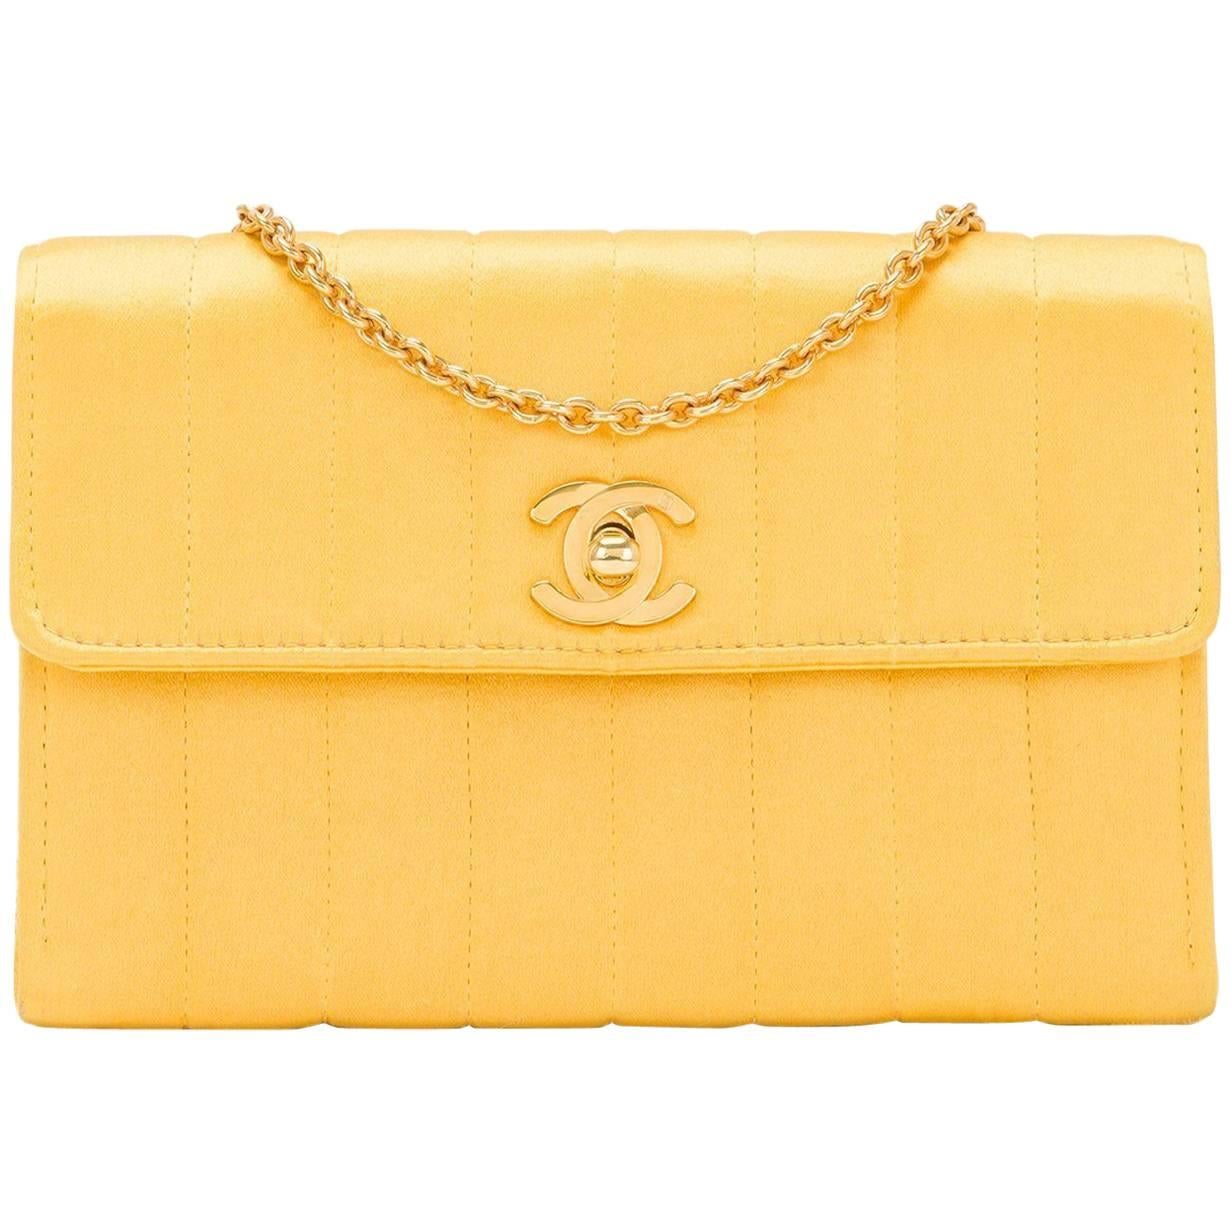 Chanel Vintage Yellow Vertical Quilted Satin Mini Flap Bag For Sale